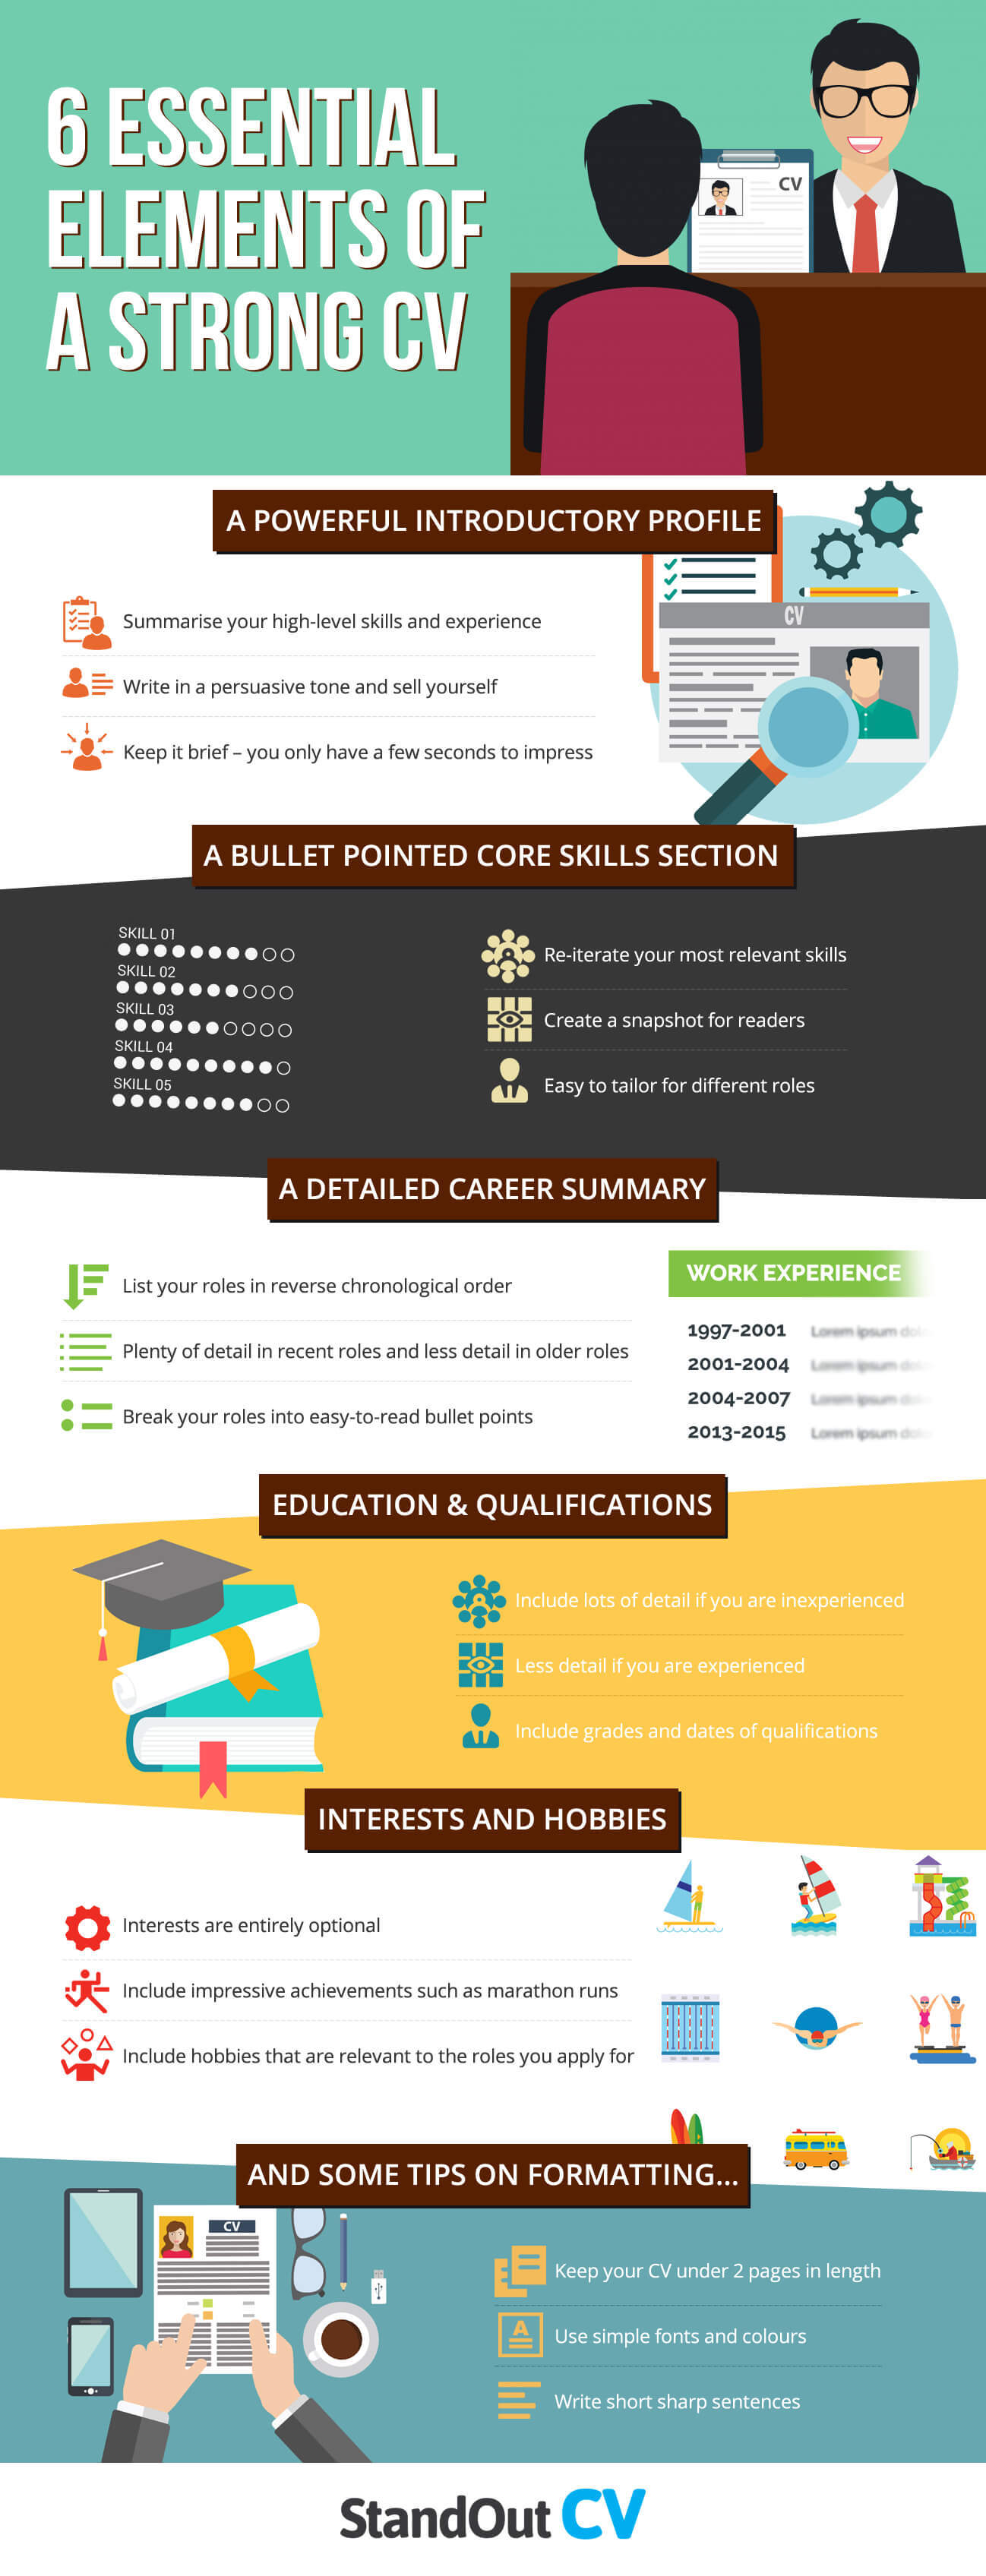 6 Essential Elements of a Strong CV Infographic